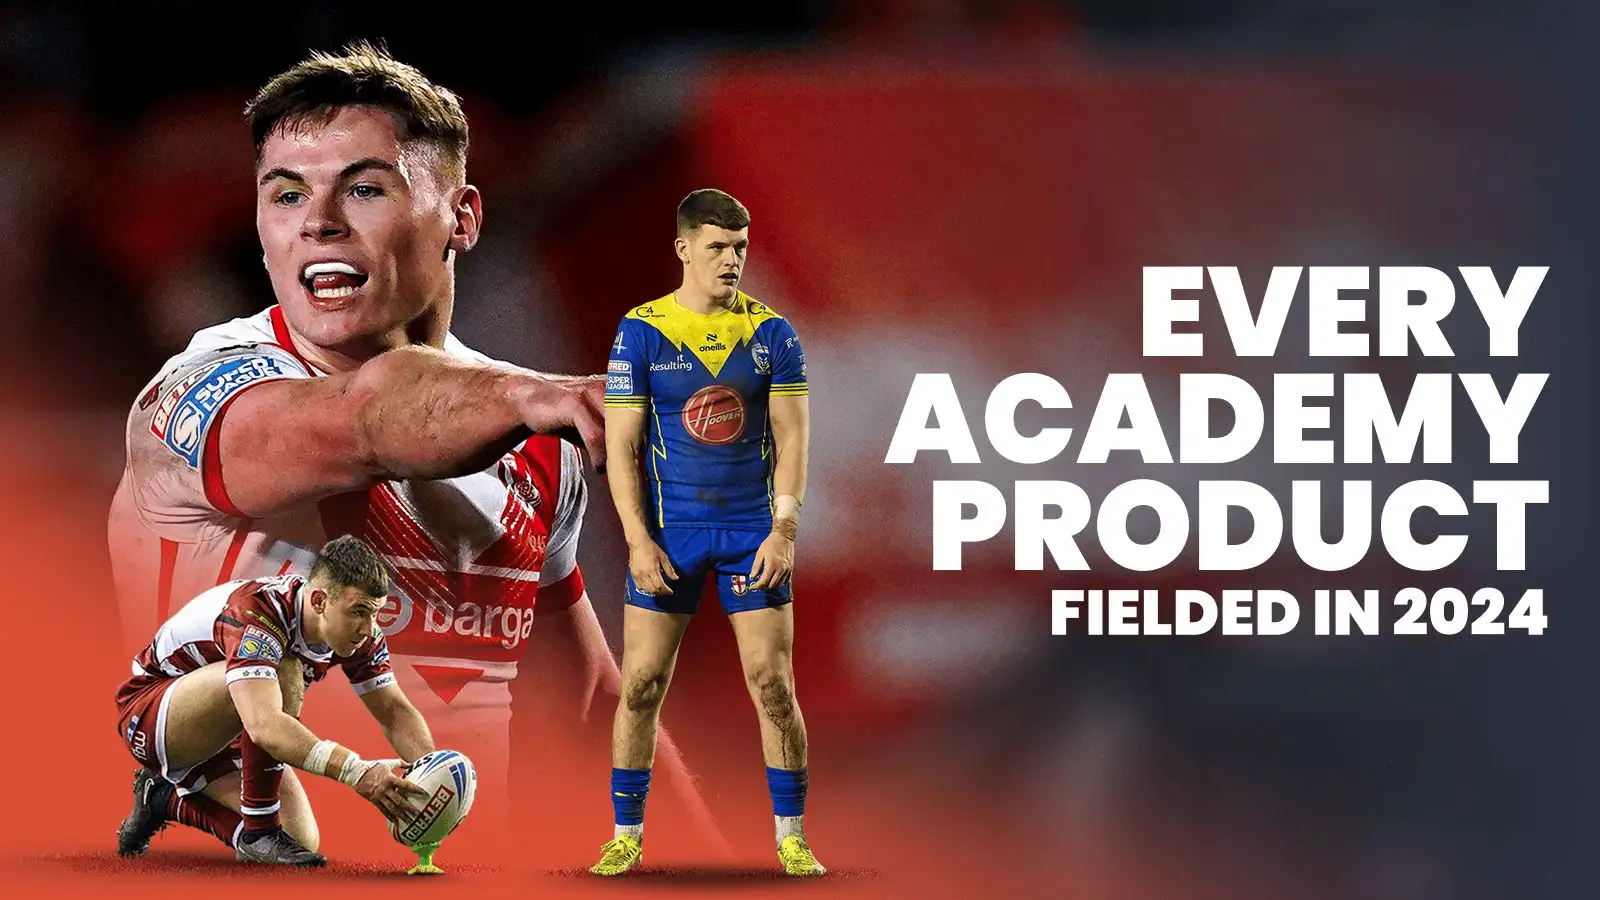 Ranking every Super League club by number of academy products fielded in 2024